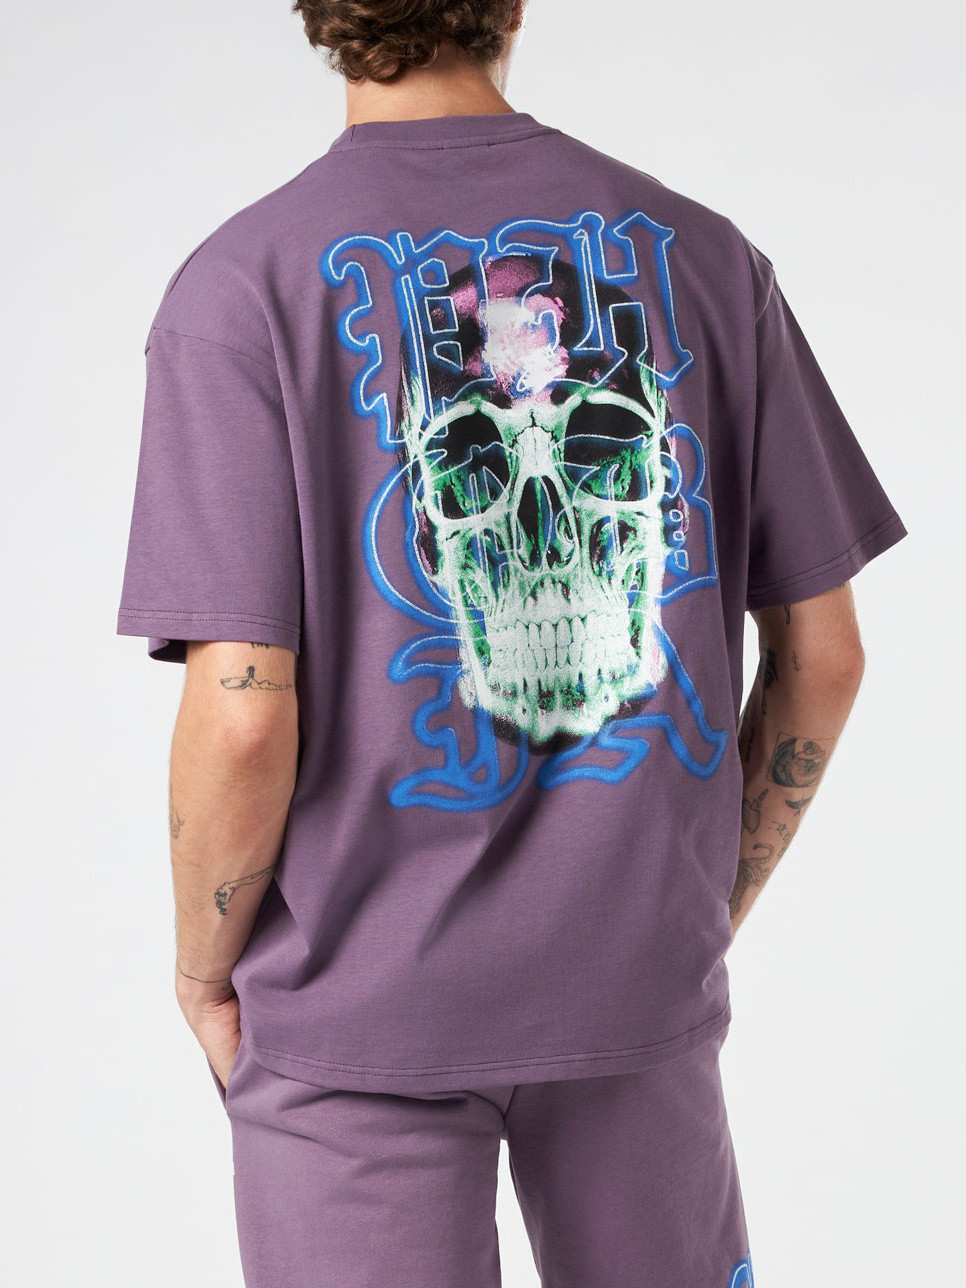 Phobia - Cotton T-shirt with print, Purple, large image number 2